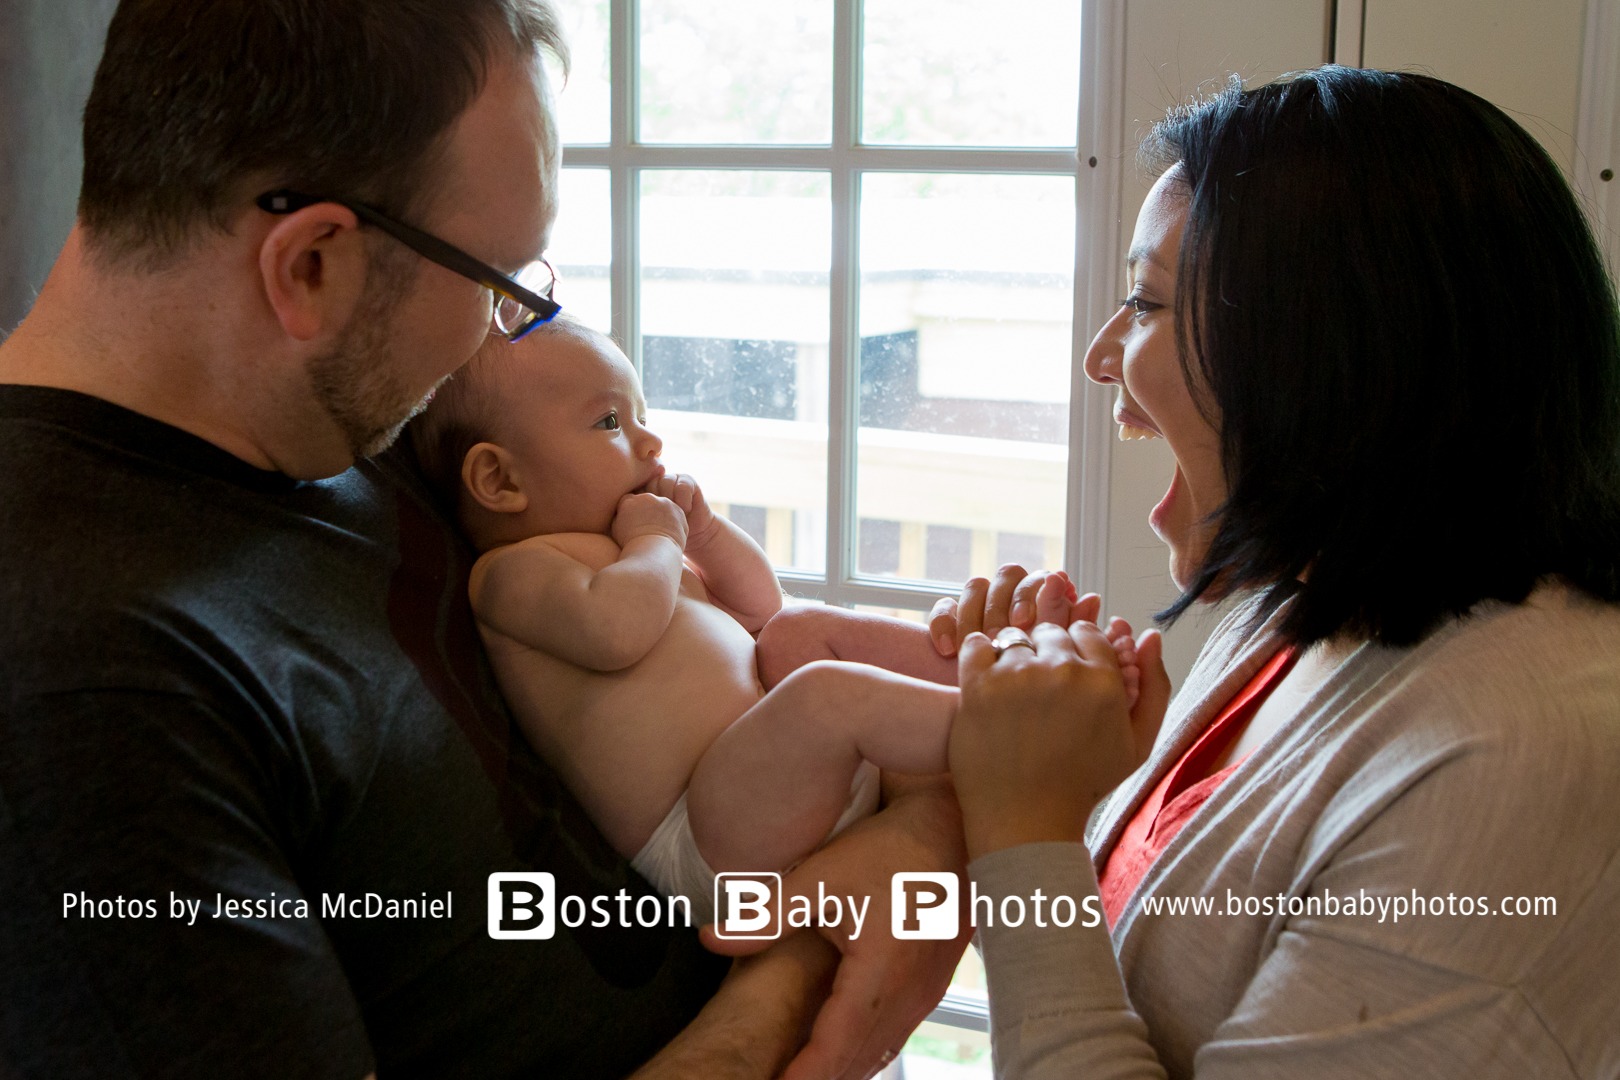 Jamaica Plain, MA: A nearly 3 month old photoshoot